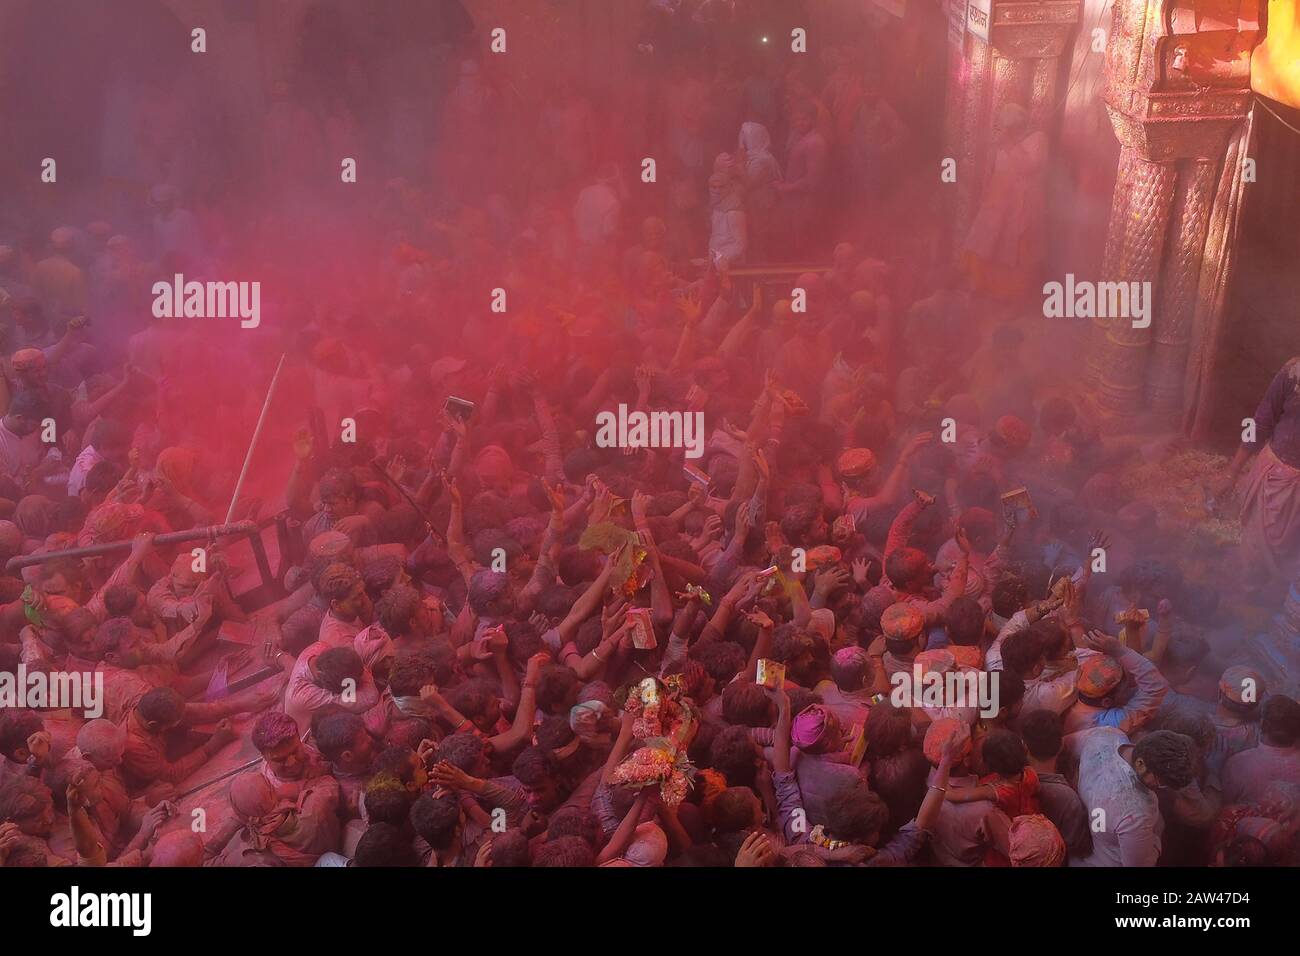 General view crowded during the Hindu Holi Festival in banke bihari temple vrindavan, India, on March 20, 2019. The Hindu Holi Festival takes place in India. The two-day celebration marks the victory of good over evil and marks the end of winter and the arrival of spring. Holi Festival celebrations are usually Indian residents playing water while throwing colorful powder. Stock Photo